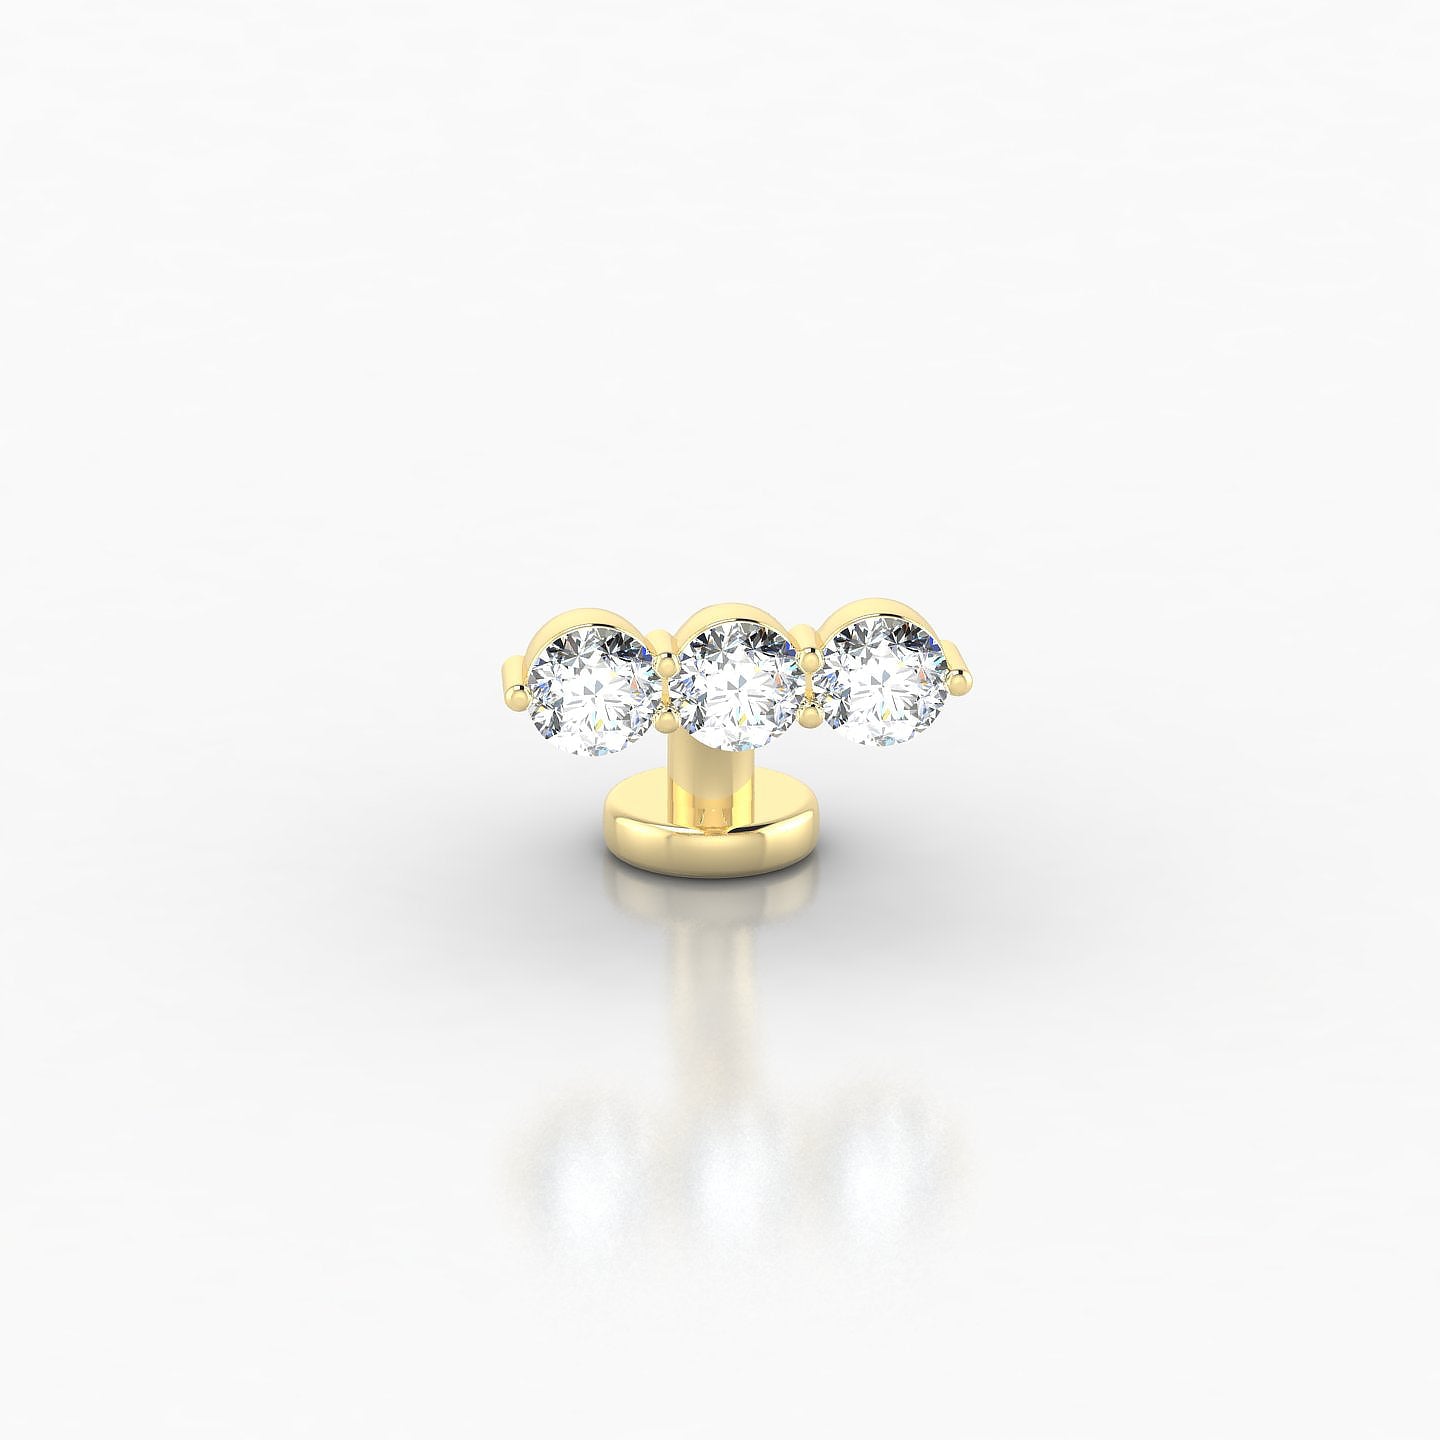 Ma'at | 18k Yellow Gold 6 mm 9 mm Trilogy Diamond Floating Navel Piercing